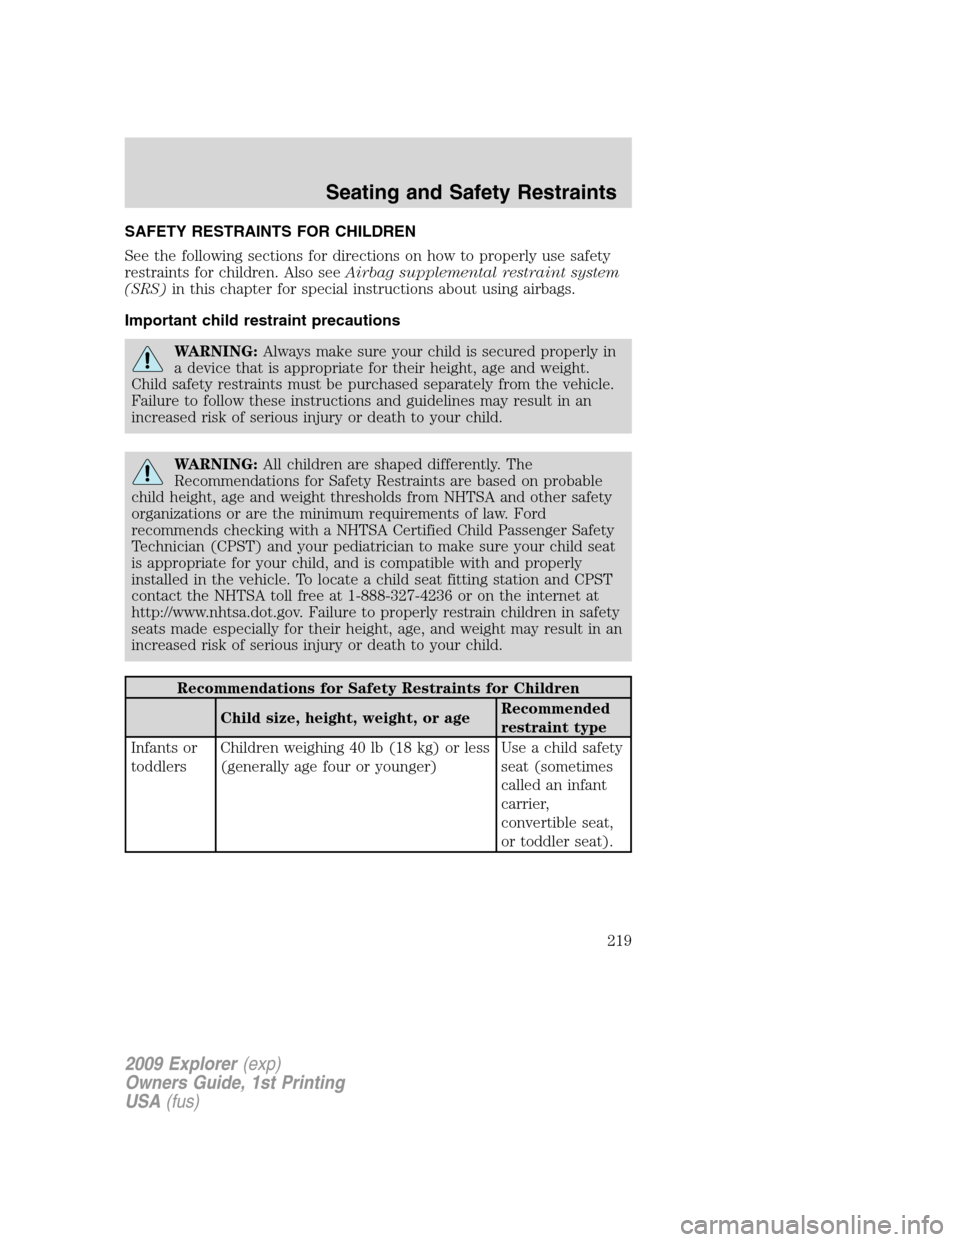 FORD EXPLORER 2009 4.G Owners Guide SAFETY RESTRAINTS FOR CHILDREN
See the following sections for directions on how to properly use safety
restraints for children. Also seeAirbag supplemental restraint system
(SRS)in this chapter for sp